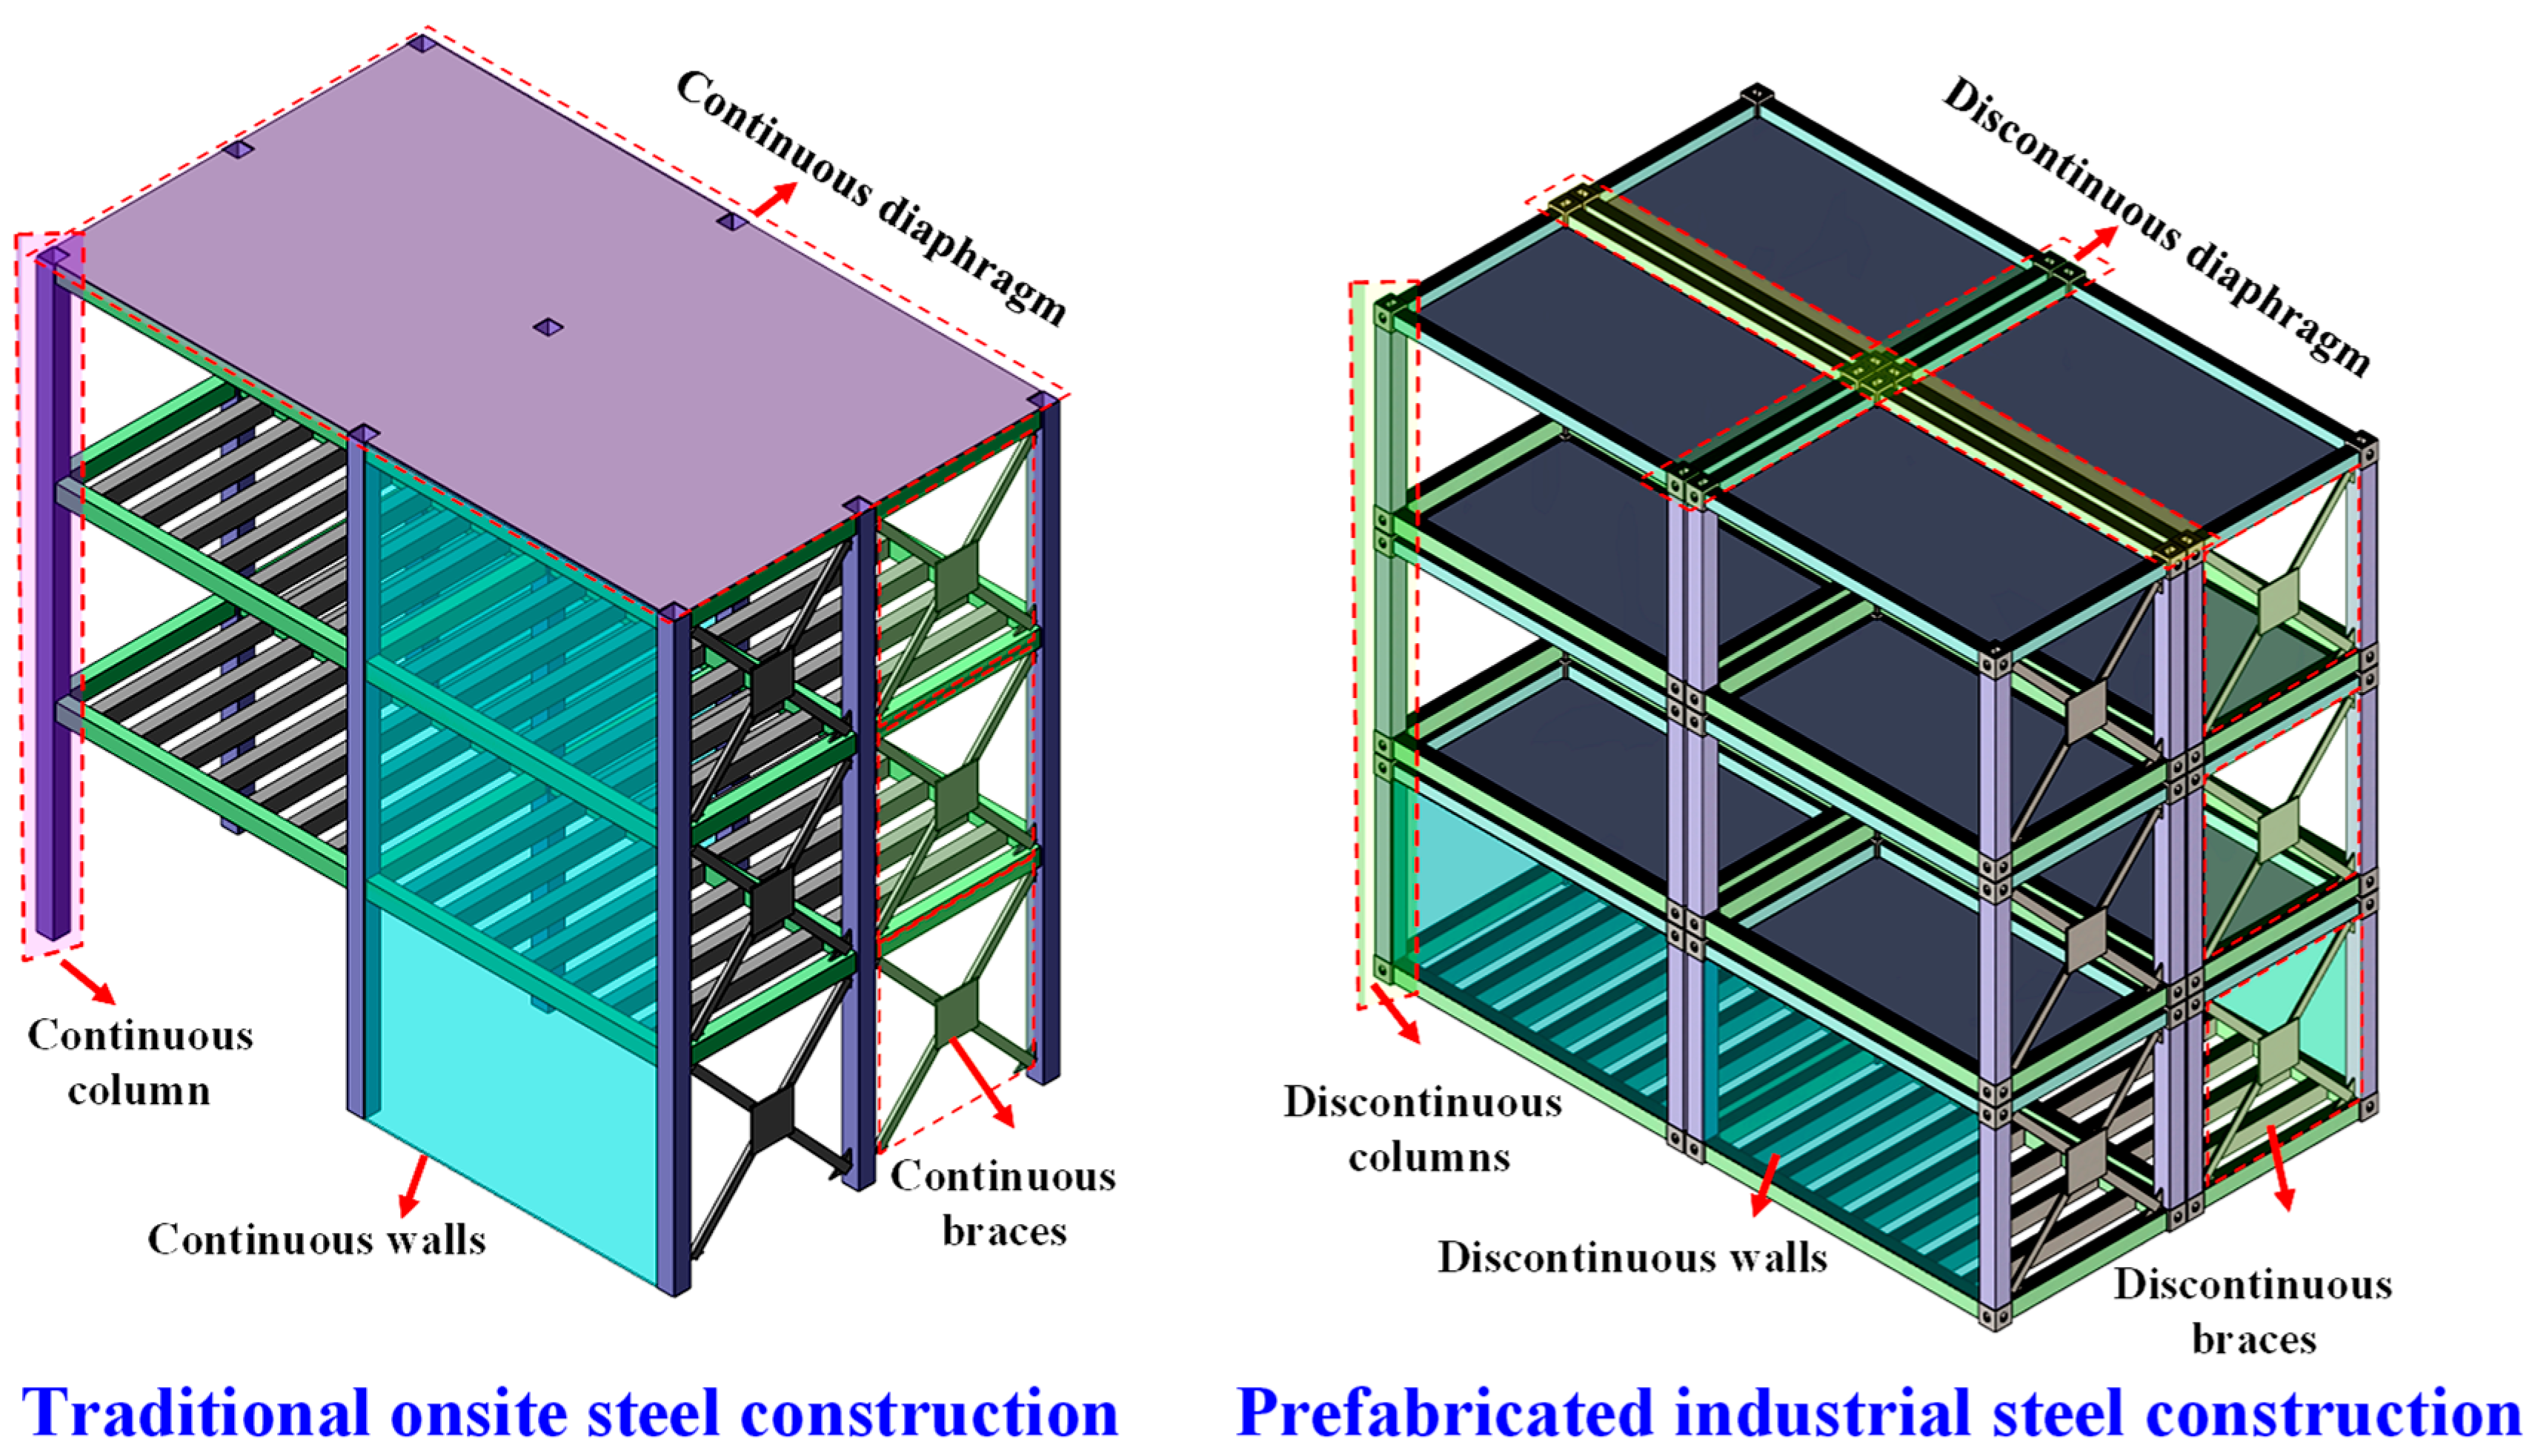 Lateral-Force Collectors for Seismic and Wind-Resistant Framing